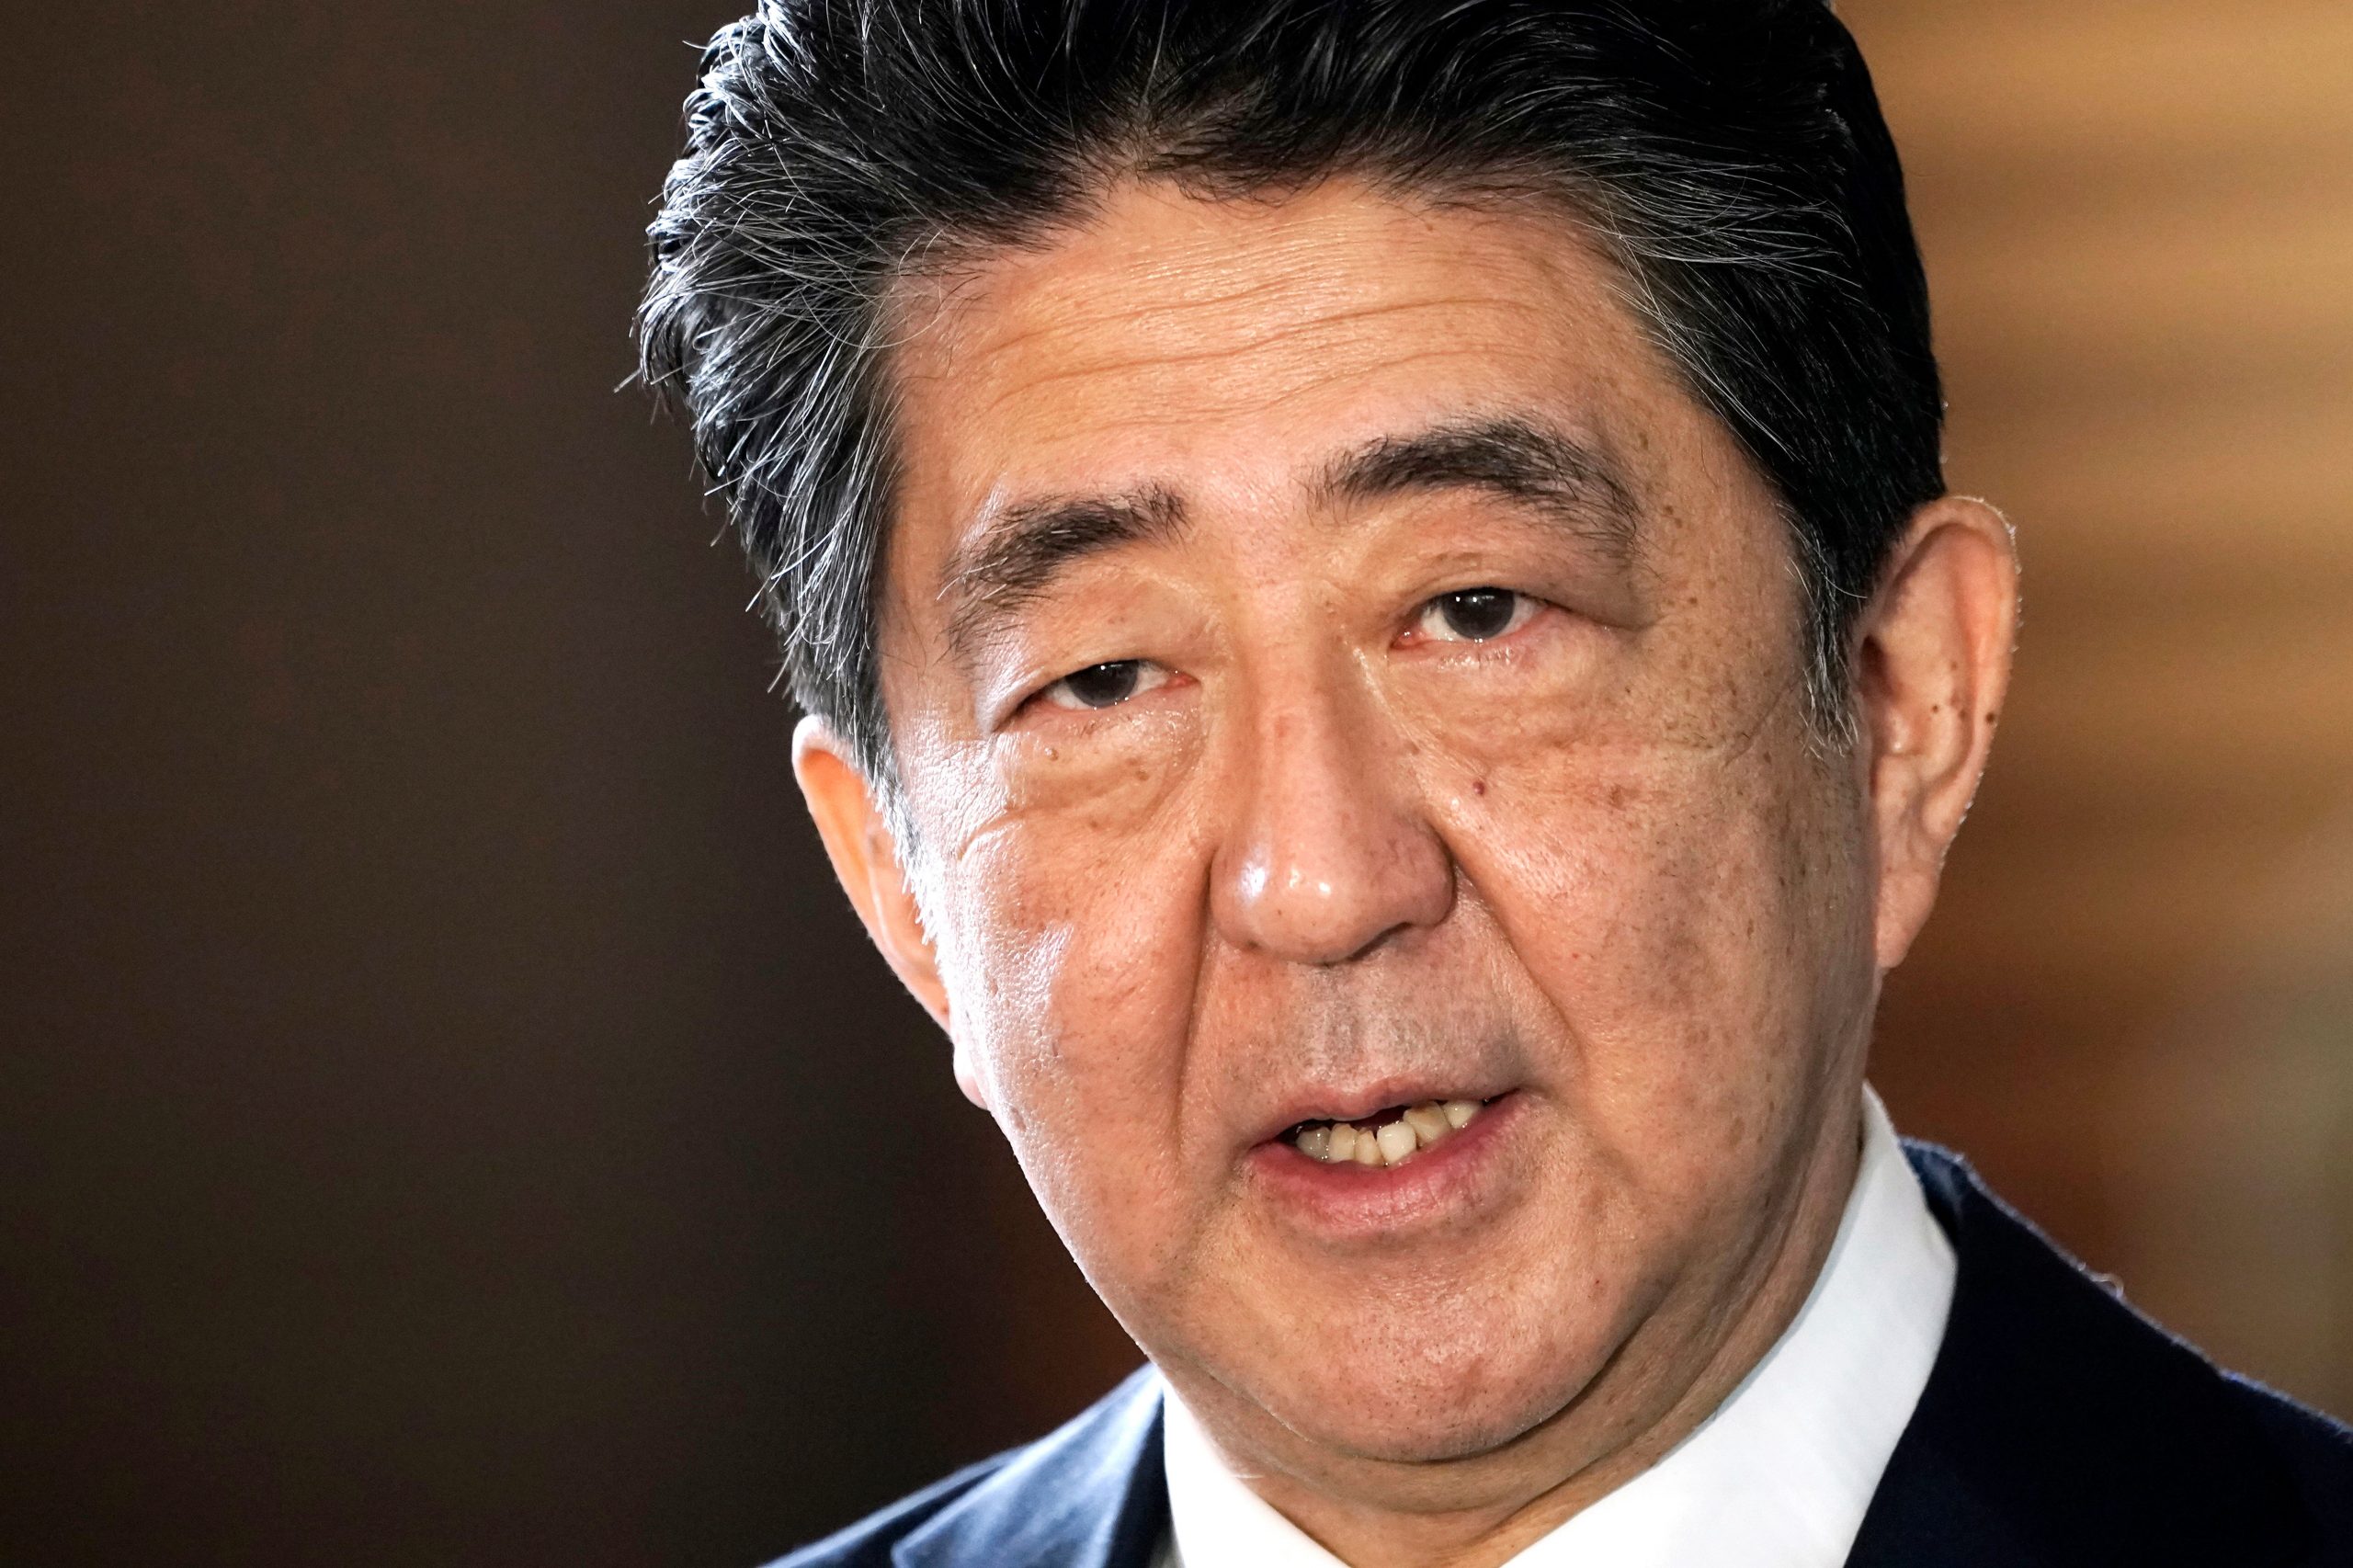 Shinzo Abe shooting: A look at former Japanese PM controversy